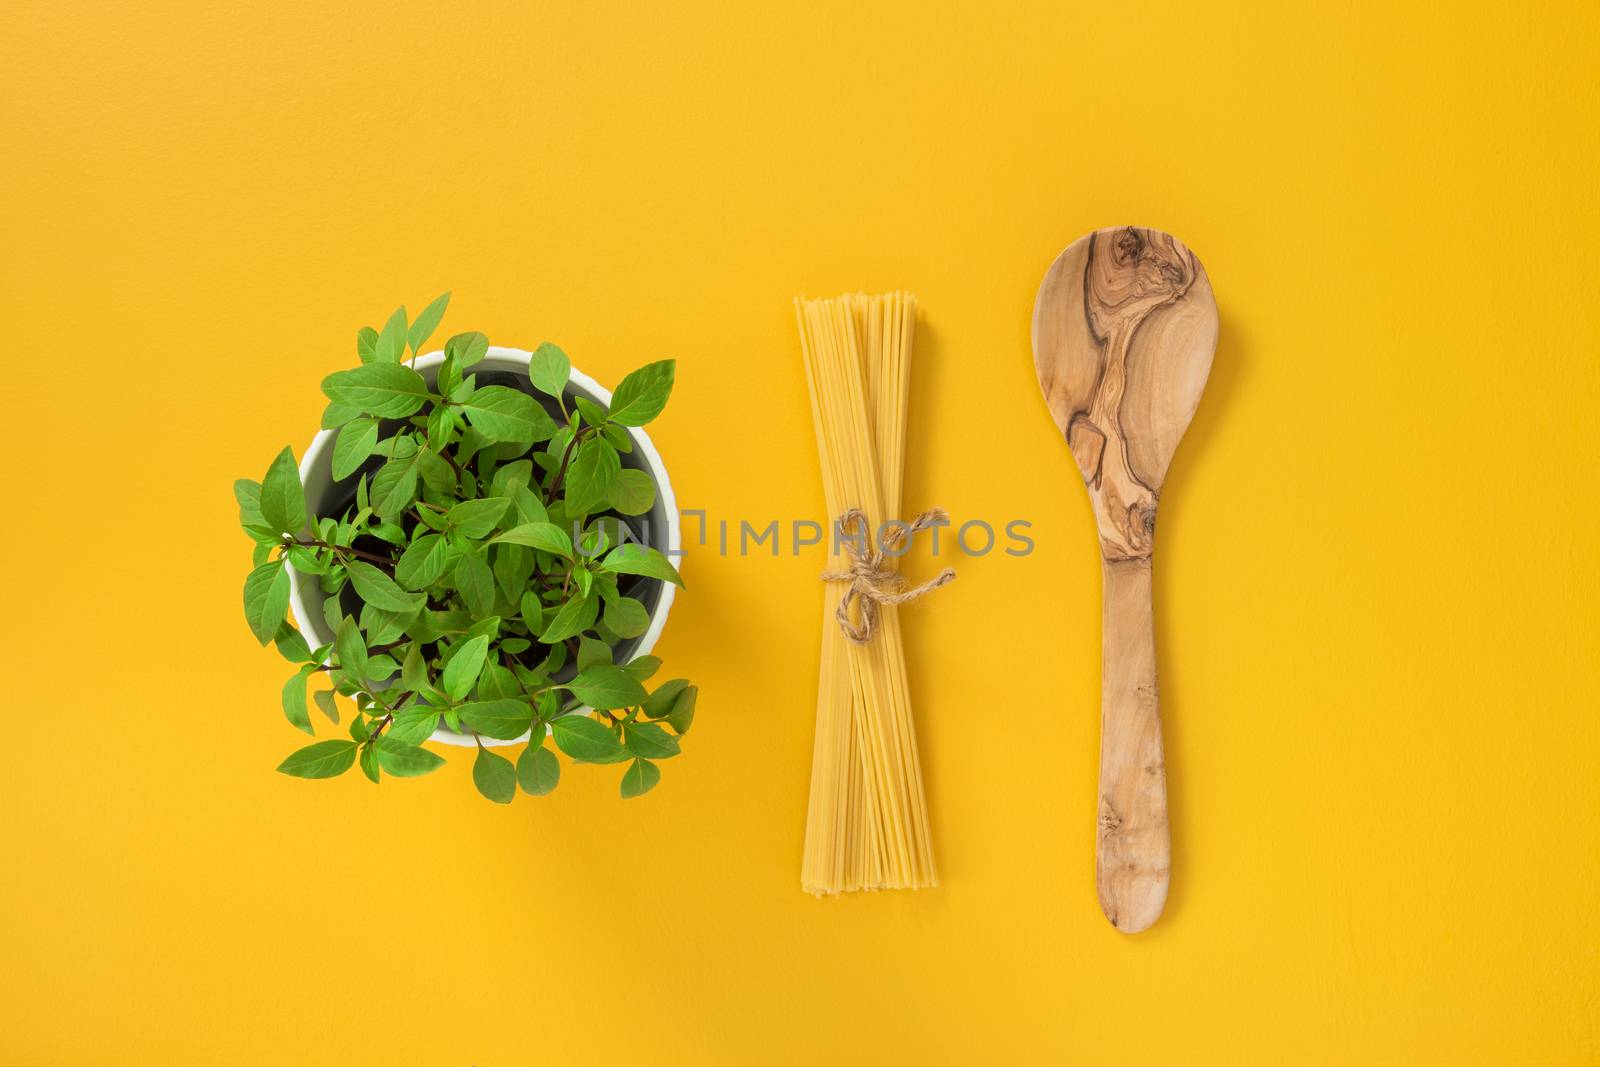 Cooking pasta. Basil herbs in a pot, spaghetti and wooden spoon on yellow background.